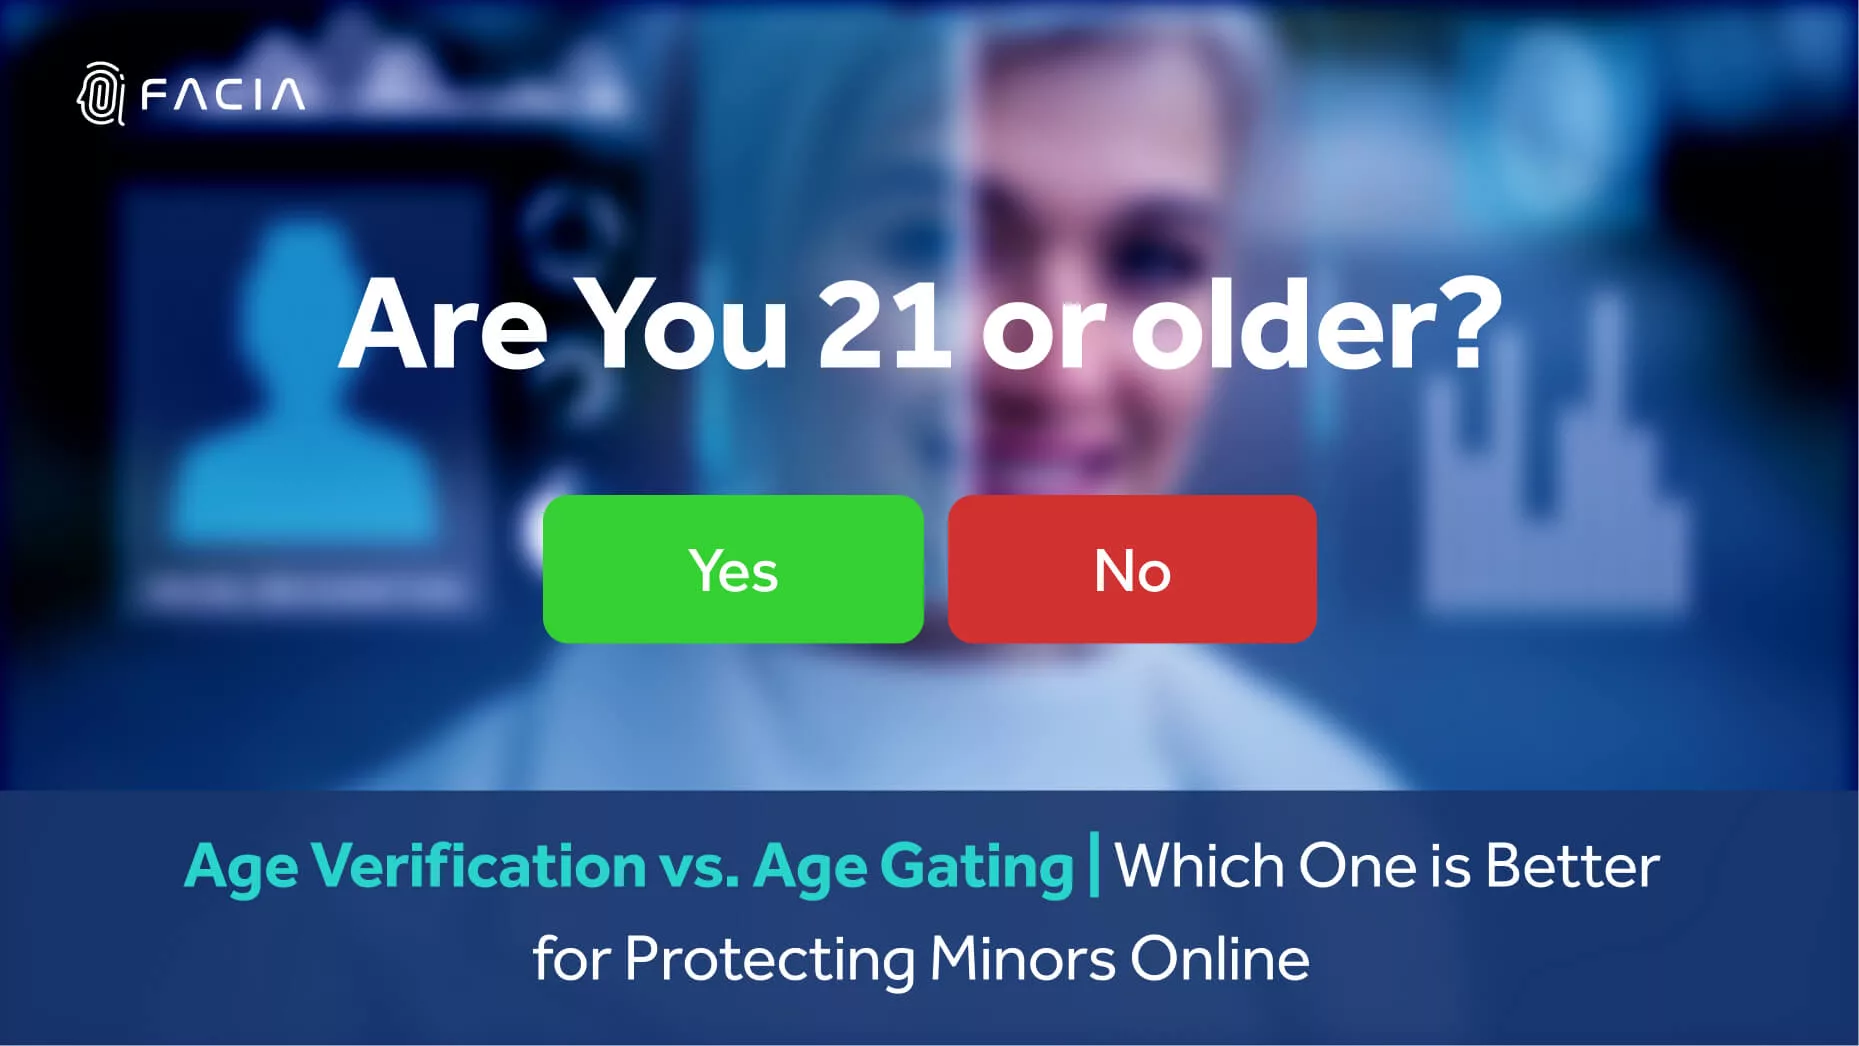 Age Verification vs. Age Gating | Which One is Better for Age Assurance and Protection